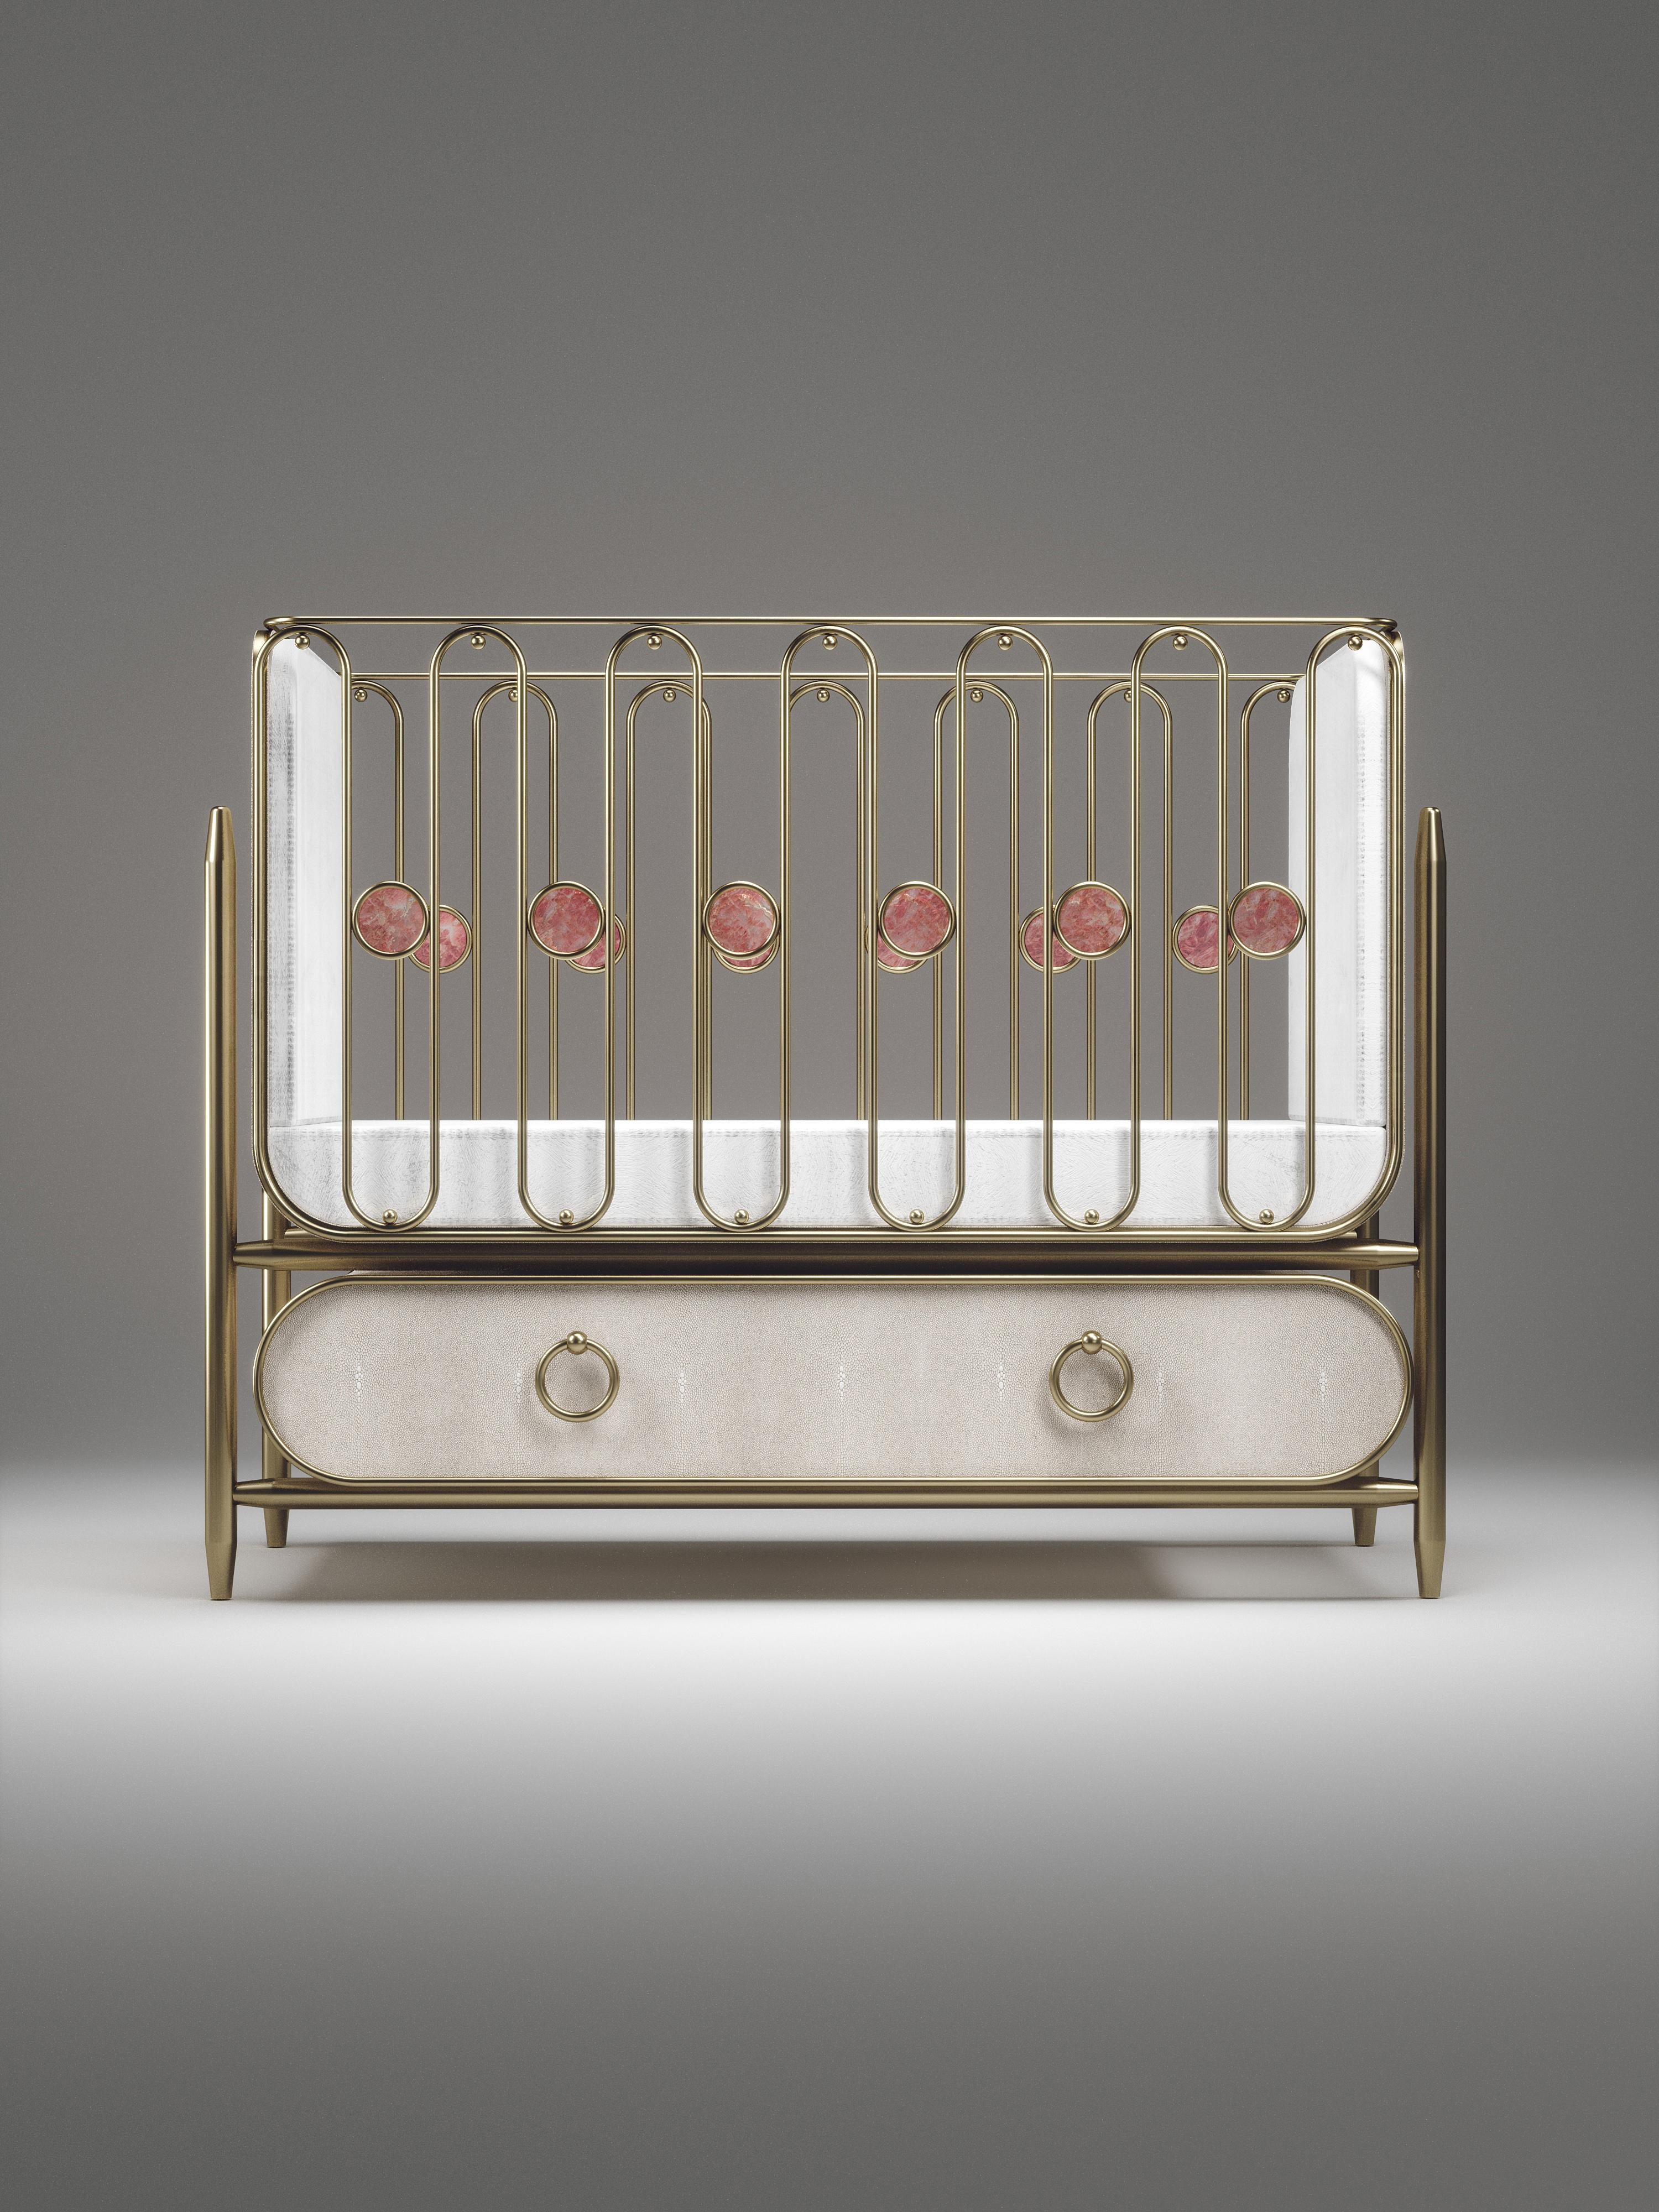 The Riviera baby crib by Kifu Paris is the ultimate luxury piece for your child's bedroom. Inspired by the birth of her first child, Kifu Augousti designed this piece to embrace the whimsical world of a child. The piece is inlaid in cream shagreen